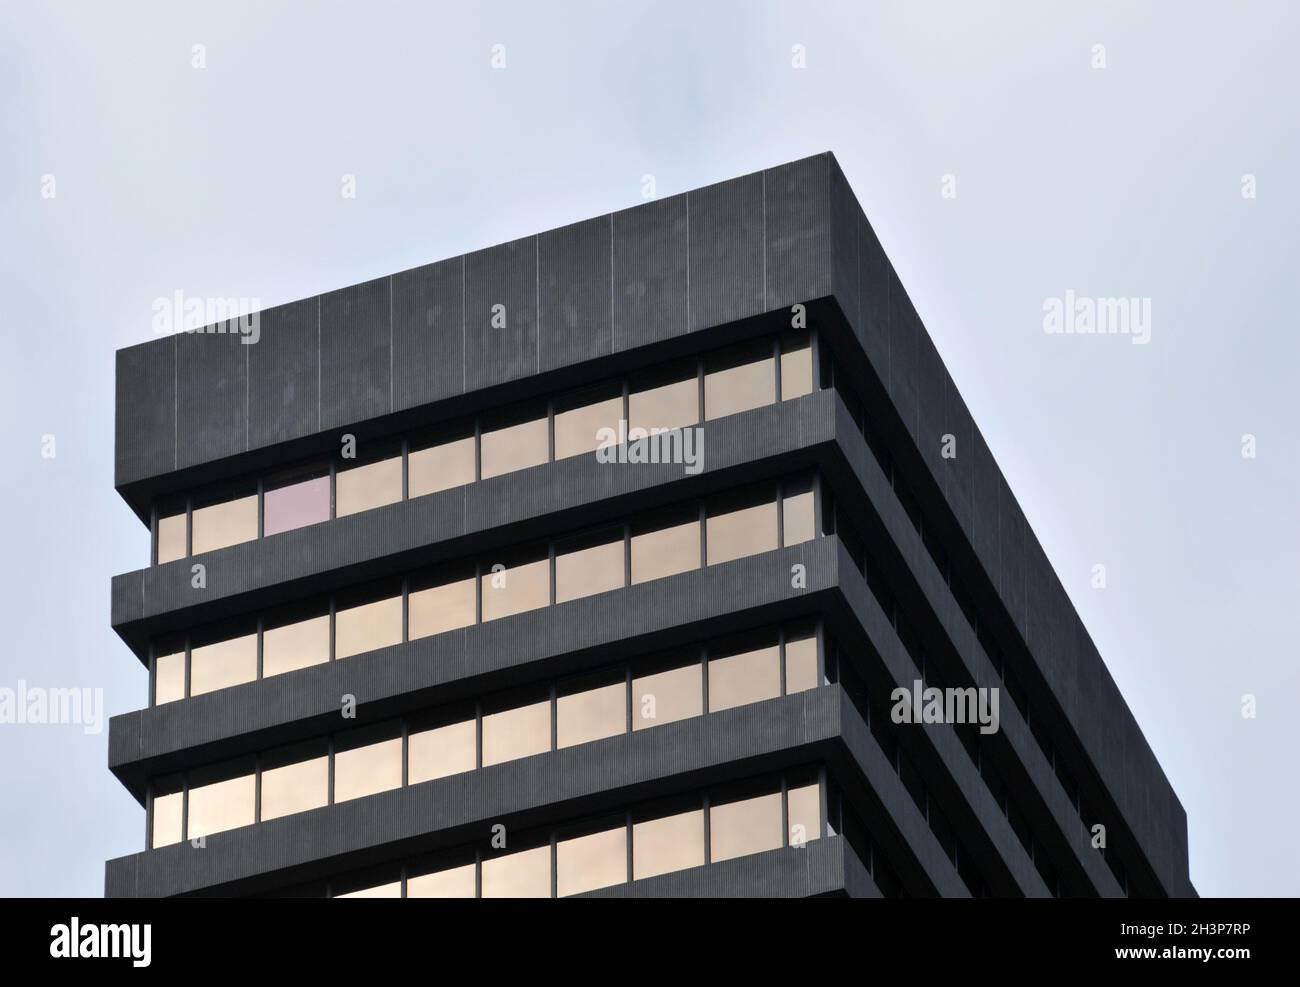 A corner detail of a typical brutalist style 1960s concrete office building with geometric concrete framework against a grey clo Stock Photo